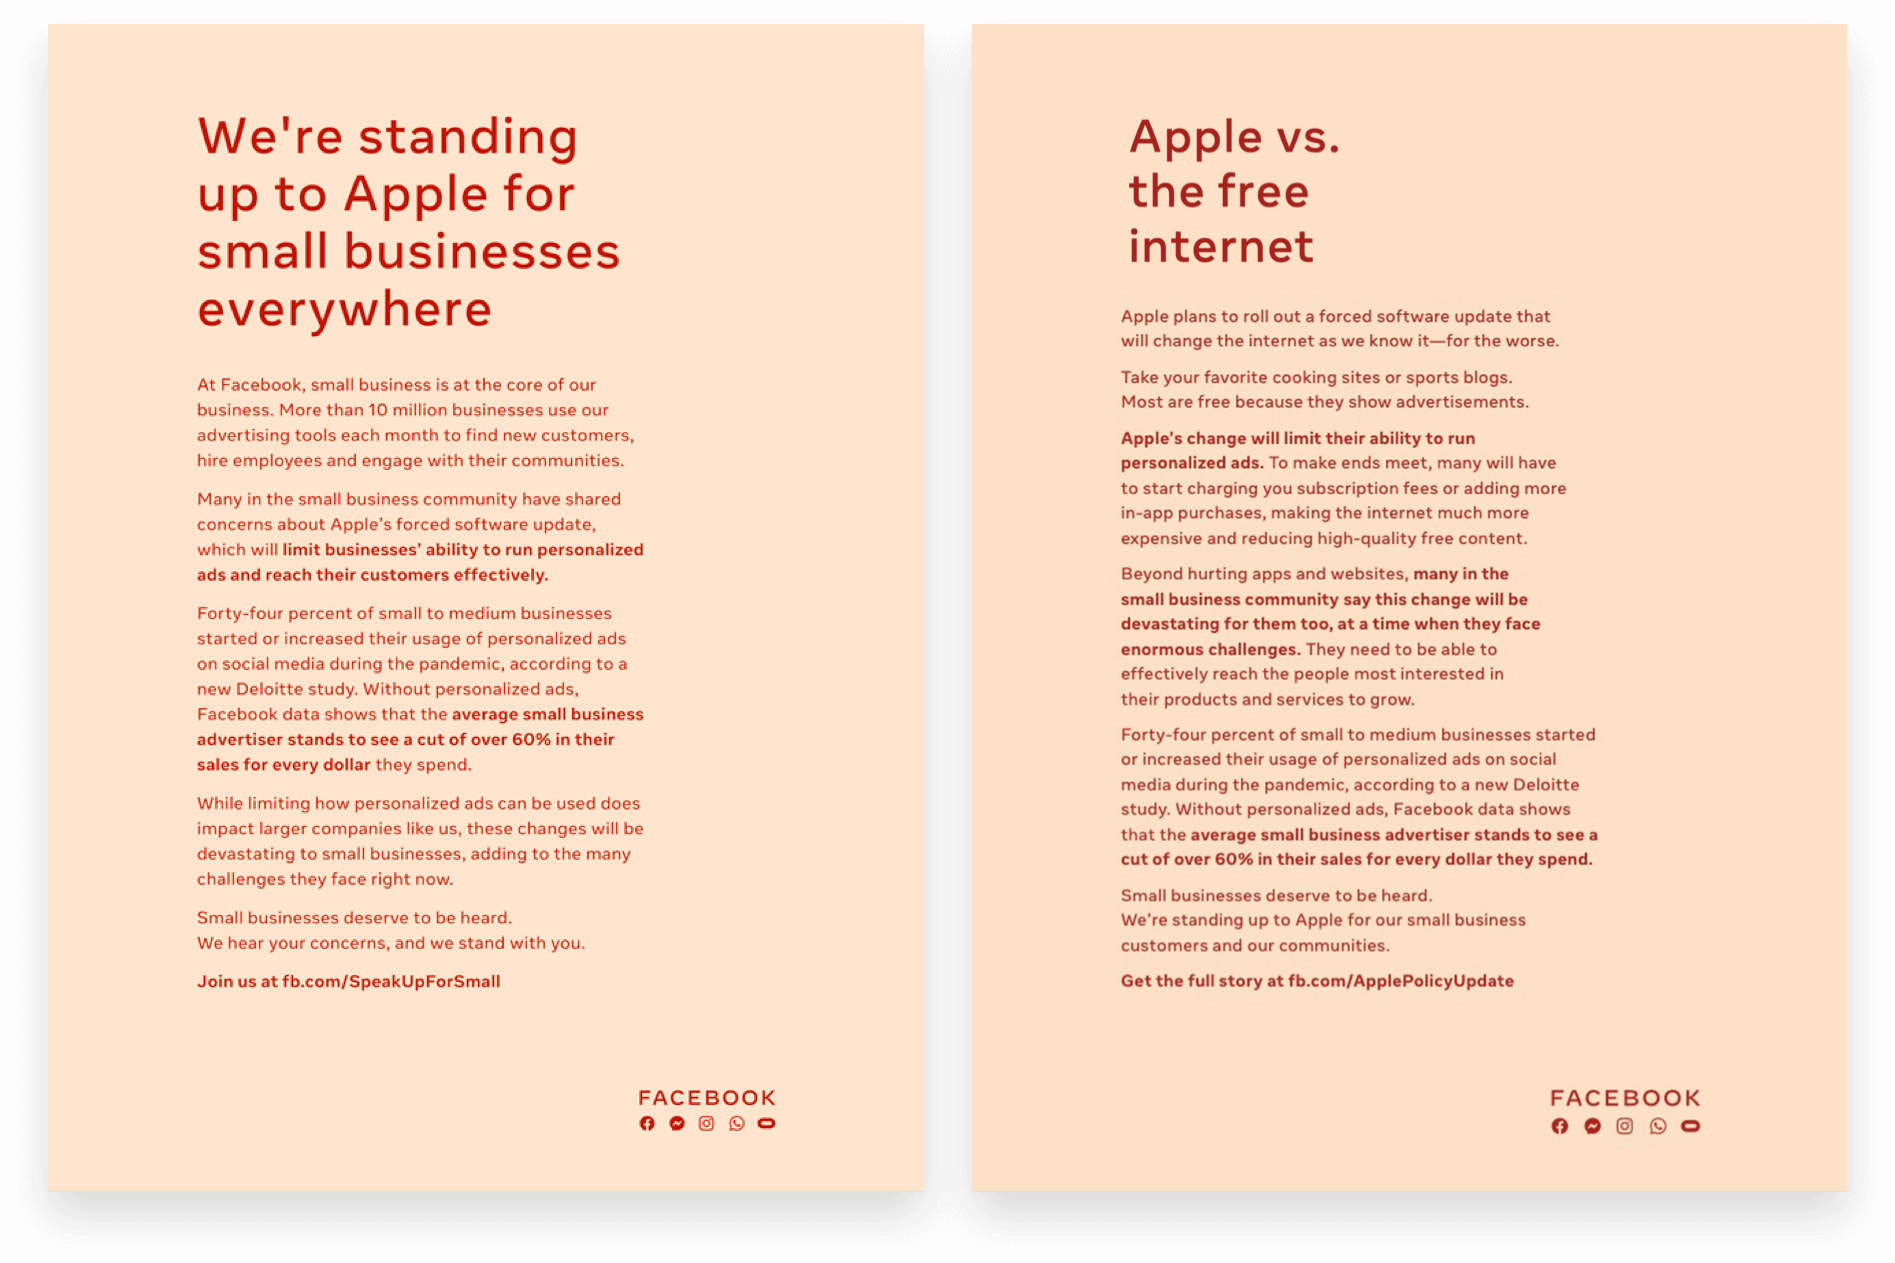 Facebook’s Full-Page Ads Against Apple iOS 14 Privacy Update from 12-16-2020 and 12-17-2020 — We're standing up to Apple for small businesses everywhere and Apple vs. the free internet